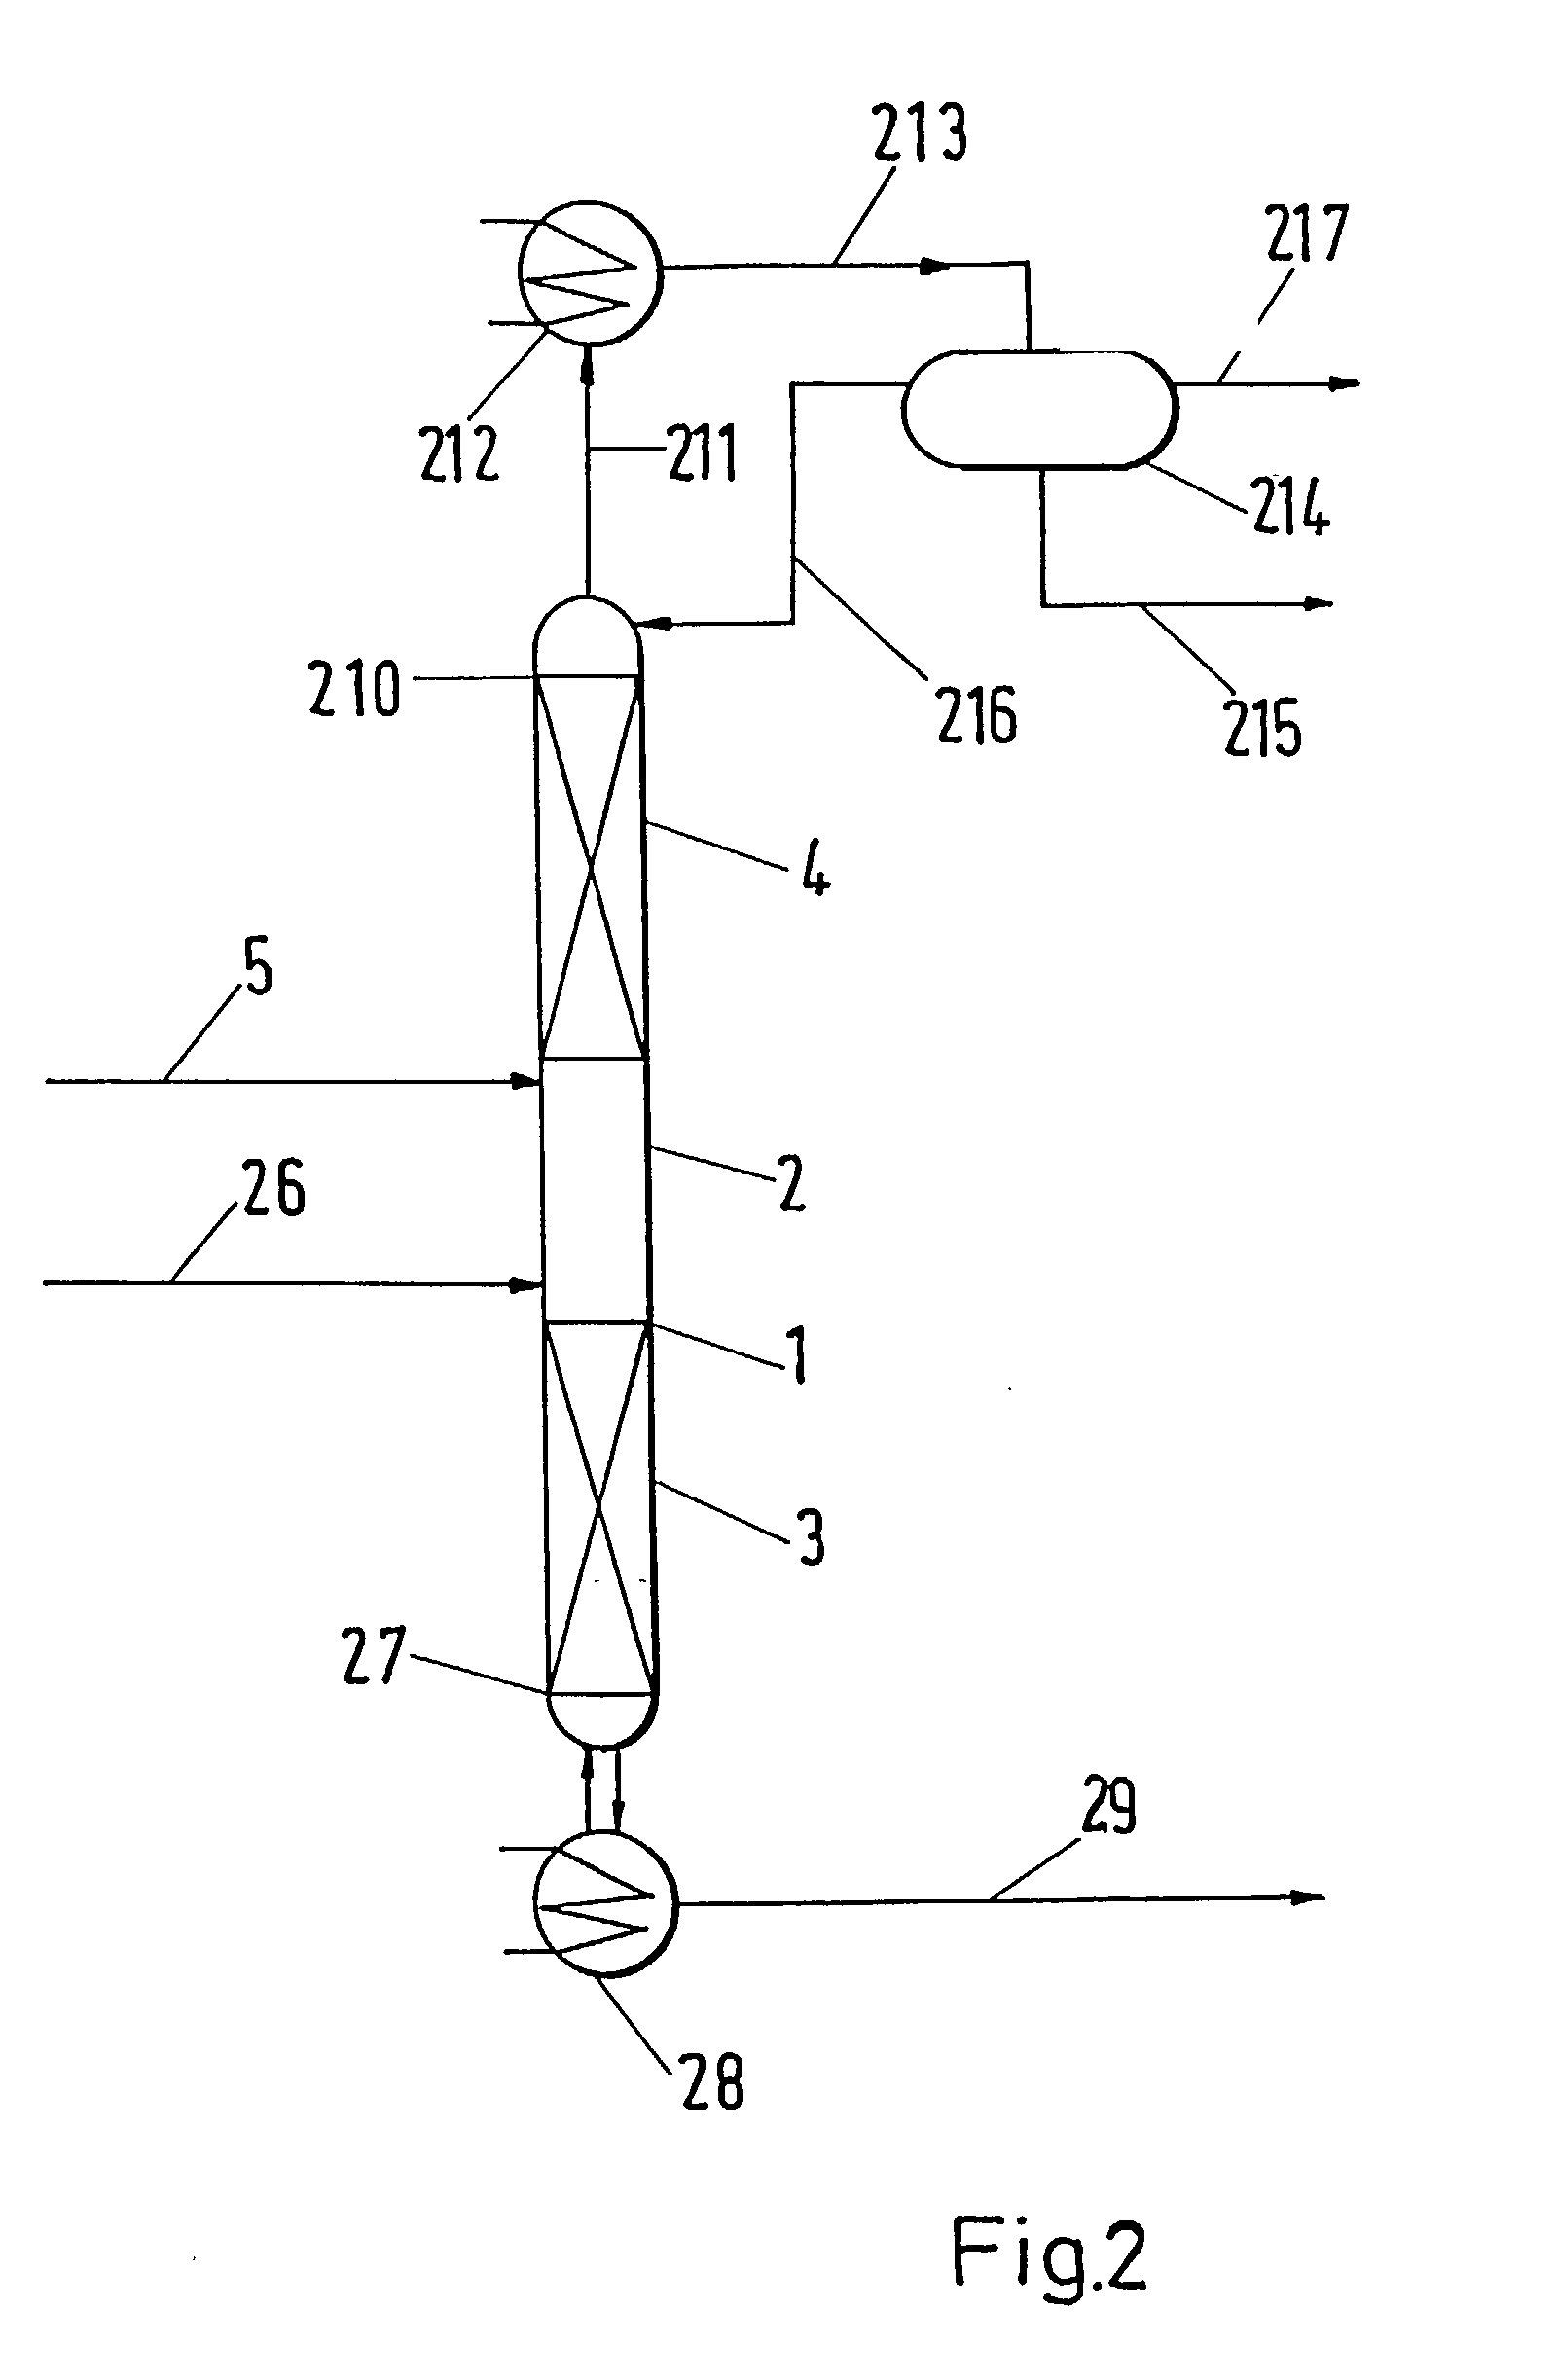 Process and apparatus for the production of butylacetate and isobutylacetate